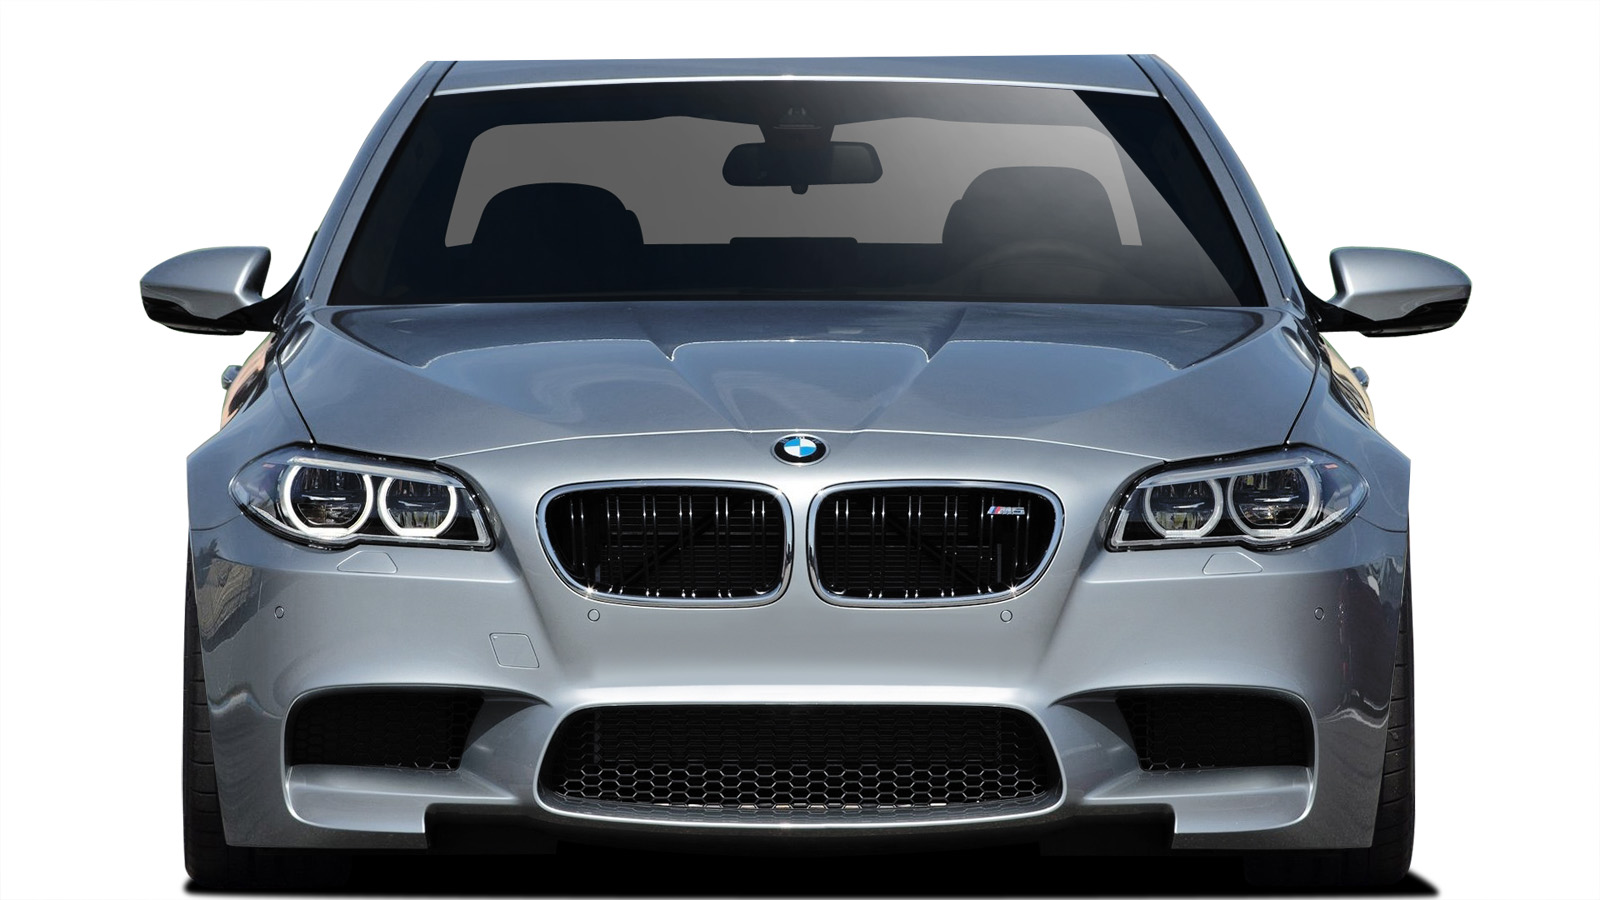 Front Bumper Bodykit for 2016 BMW 5 Series ALL - BMW 5 Series F10 Vaero M5 Look Conversion Front Bumper Cover ( with PDC , with Washer , without Cam